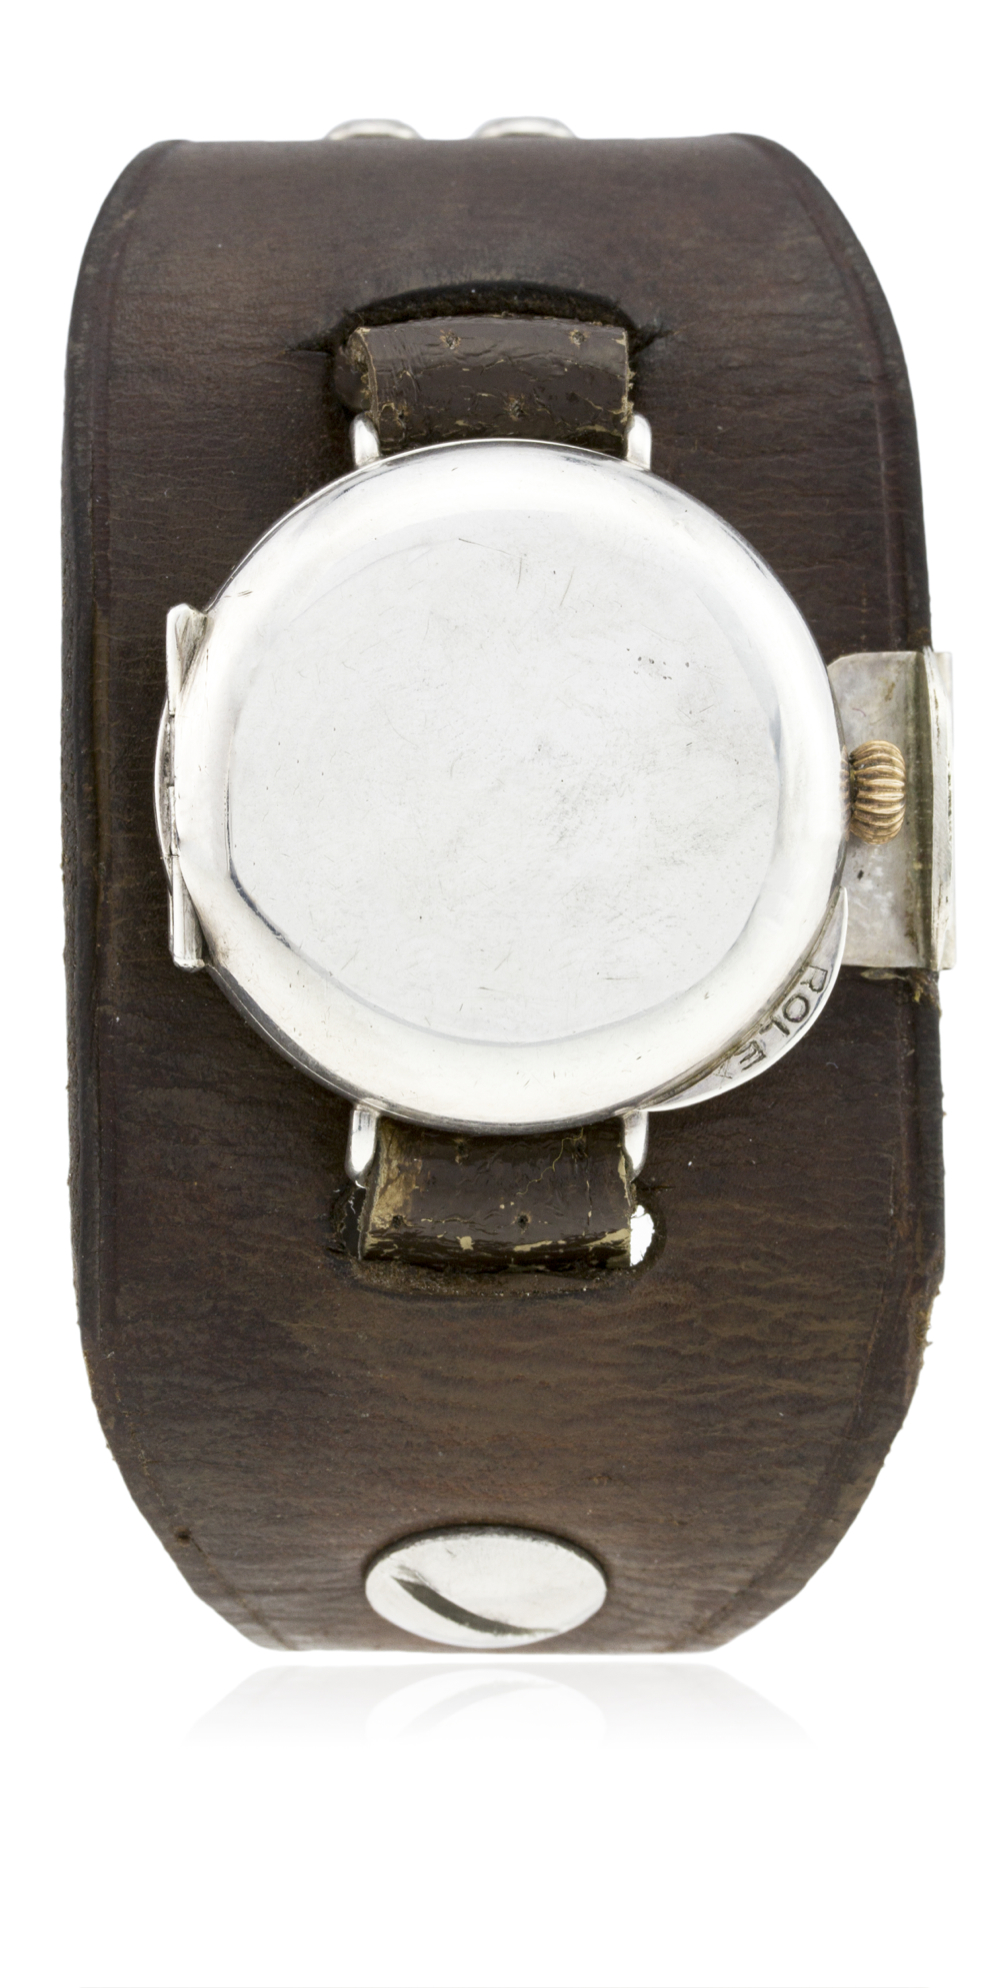 AN EXTREMELY RARE GENTLEMAN'S SOLID SILVER ROLEX FULL HUNTER WWI "OFFICERS" WRIST WATCH CIRCA